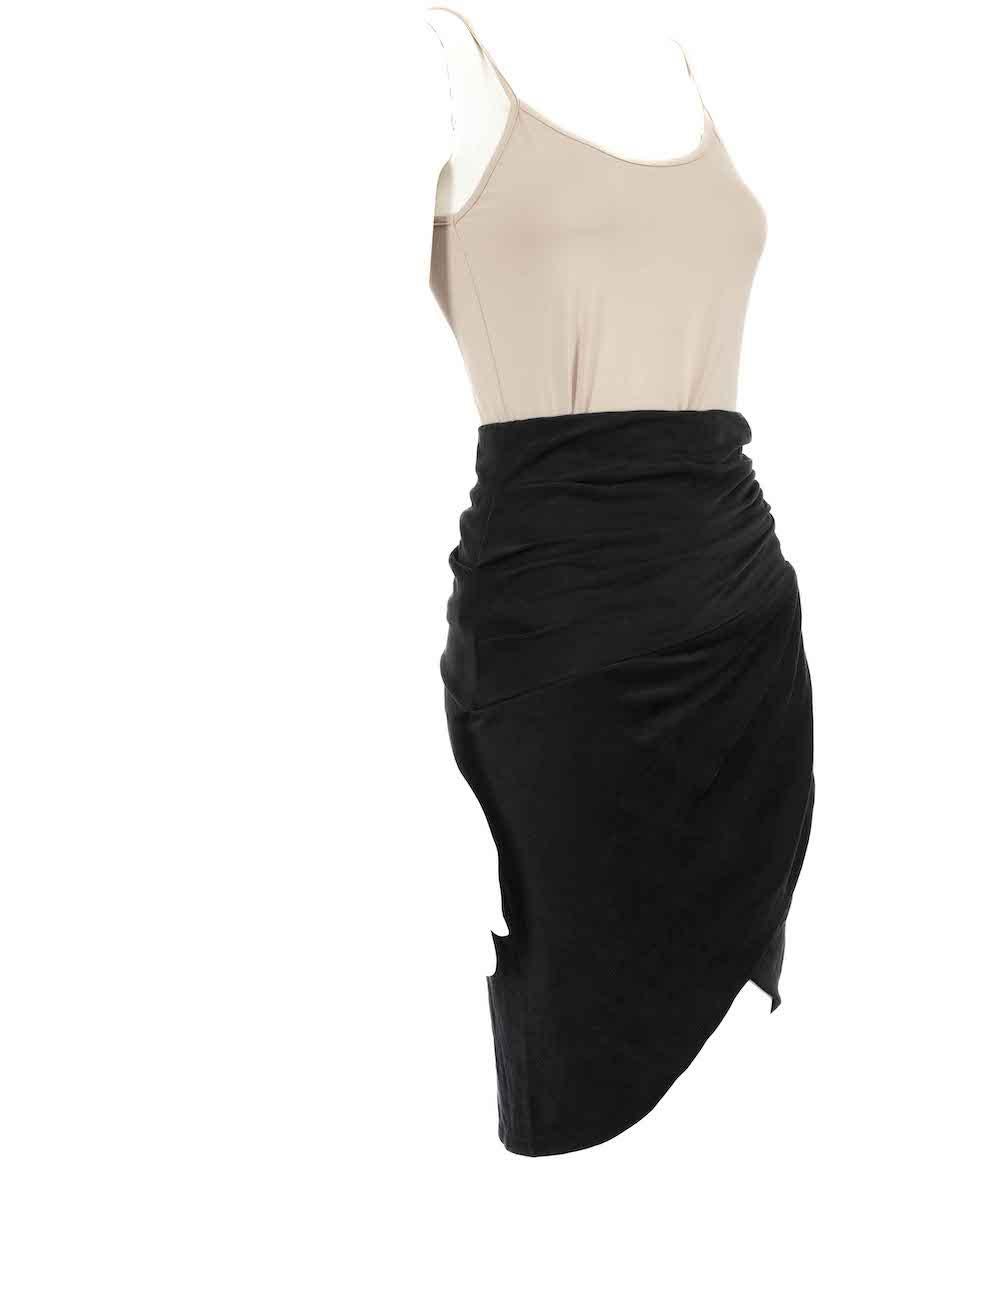 CONDITION is Never worn, with tags. No visible wear to skirt is evident on this new Iro designer resale item.
 
 
 
 Details
 
 
 Black
 
 Synthetic
 
 Skirt
 
 Knee length
 
 Side snap button fastening
 
 Side ruched detail
 
 
 
 
 
 Made in